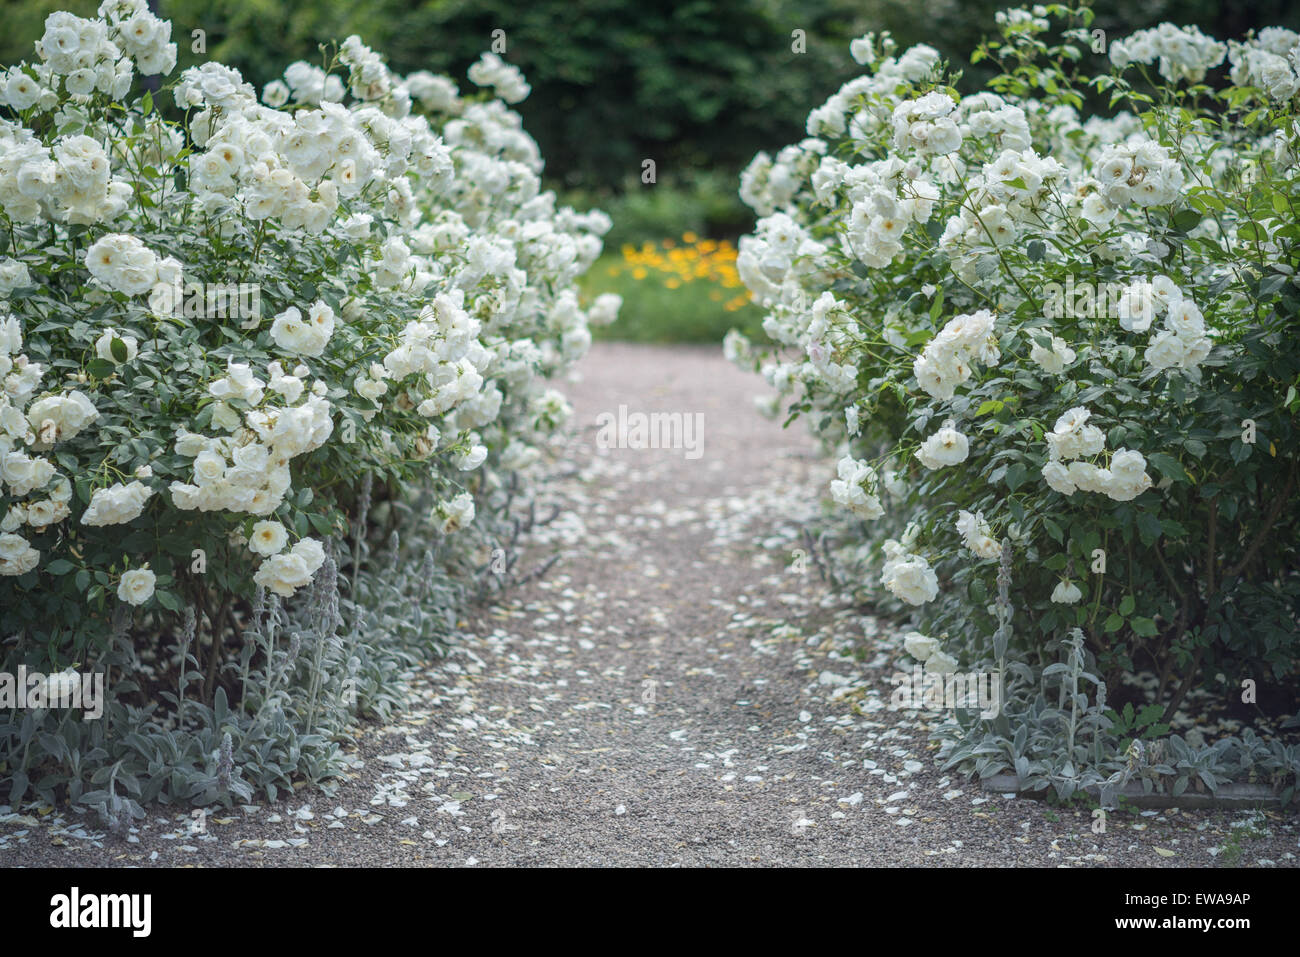 Pathway bordered with bushes of blooming white roses Stock Photo